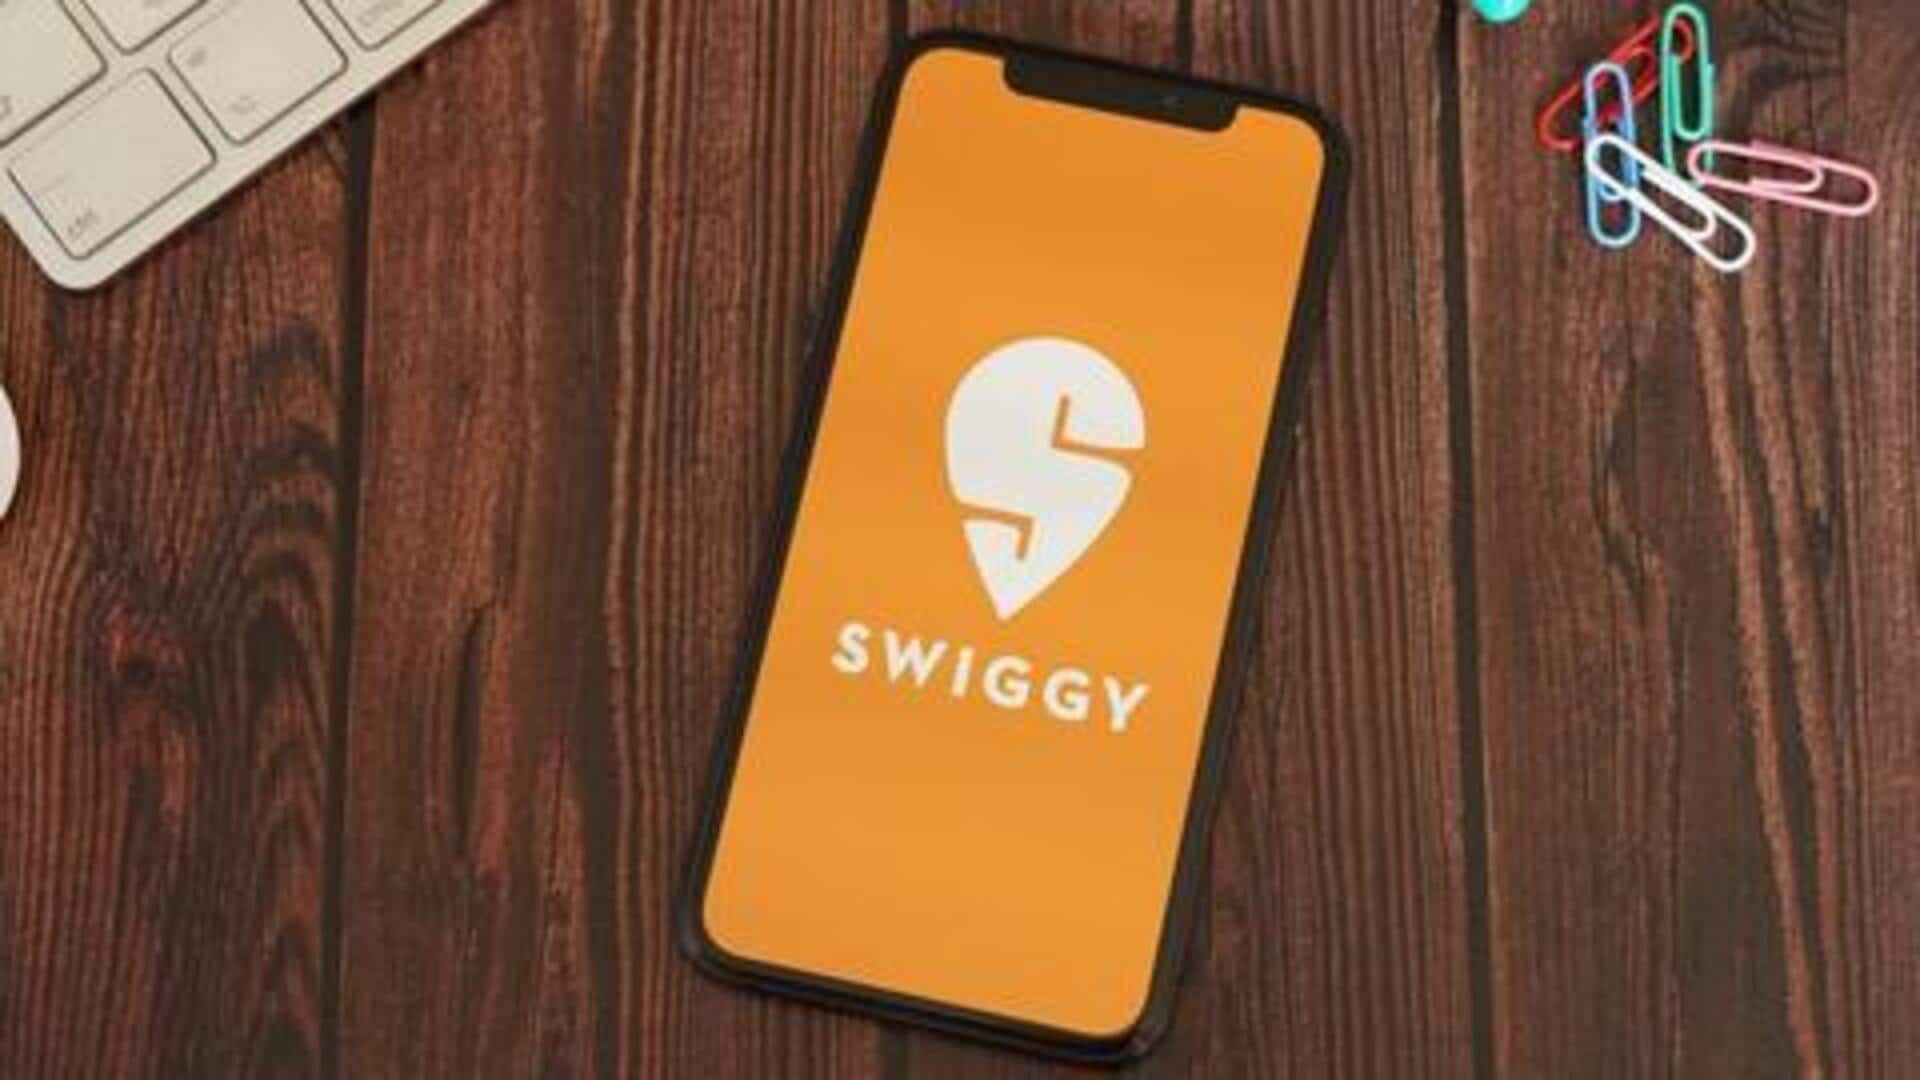 Swiggy converts to public company ahead of its IPO 